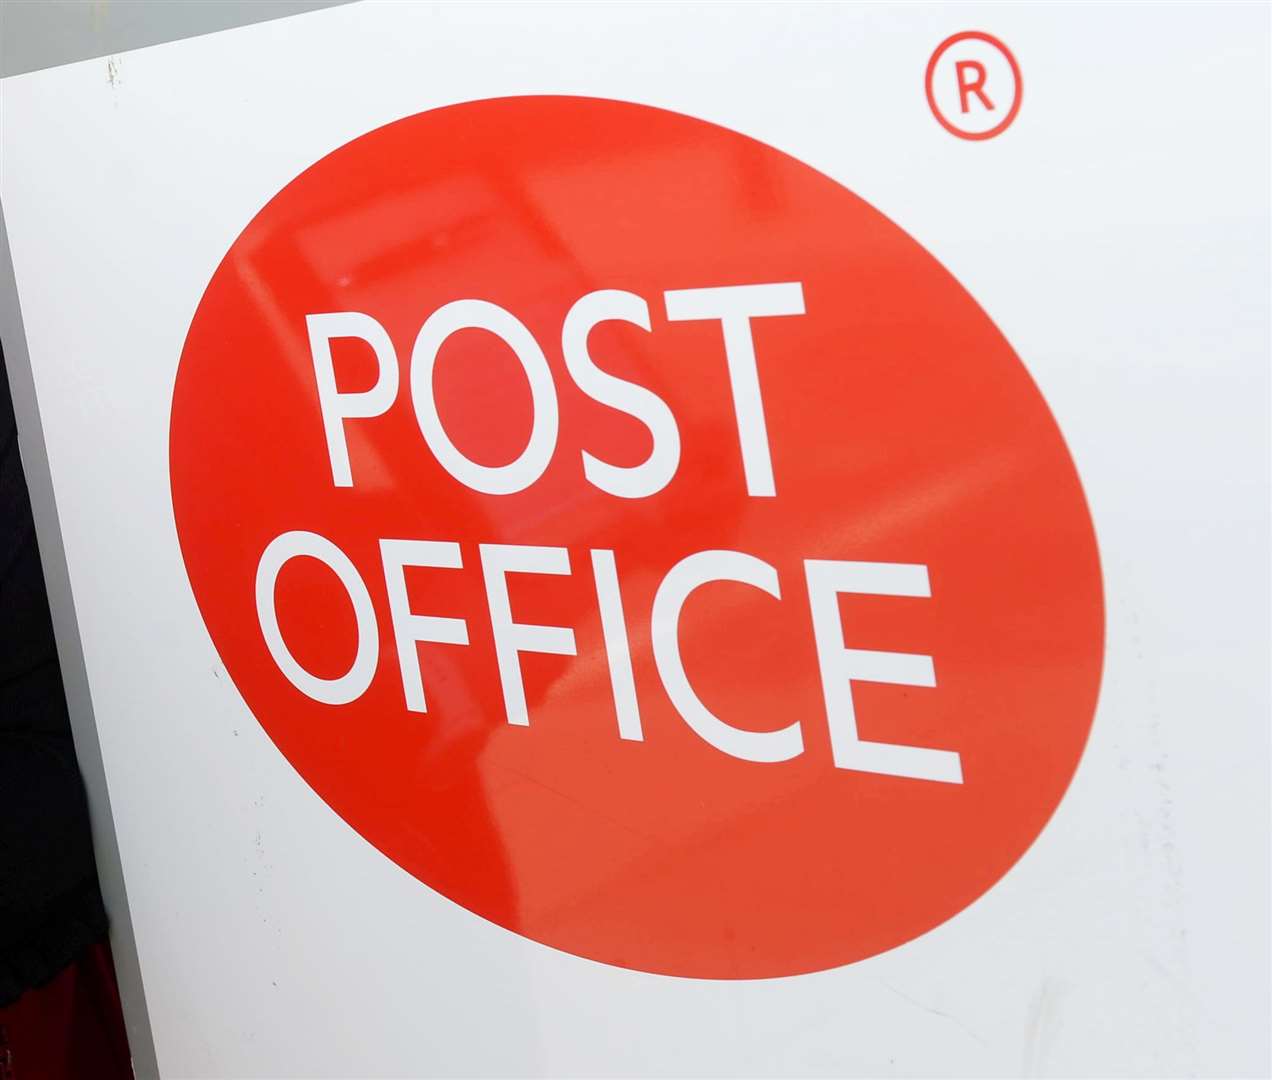 Postal services in the Highlands are almost at breaking point, warned the union.